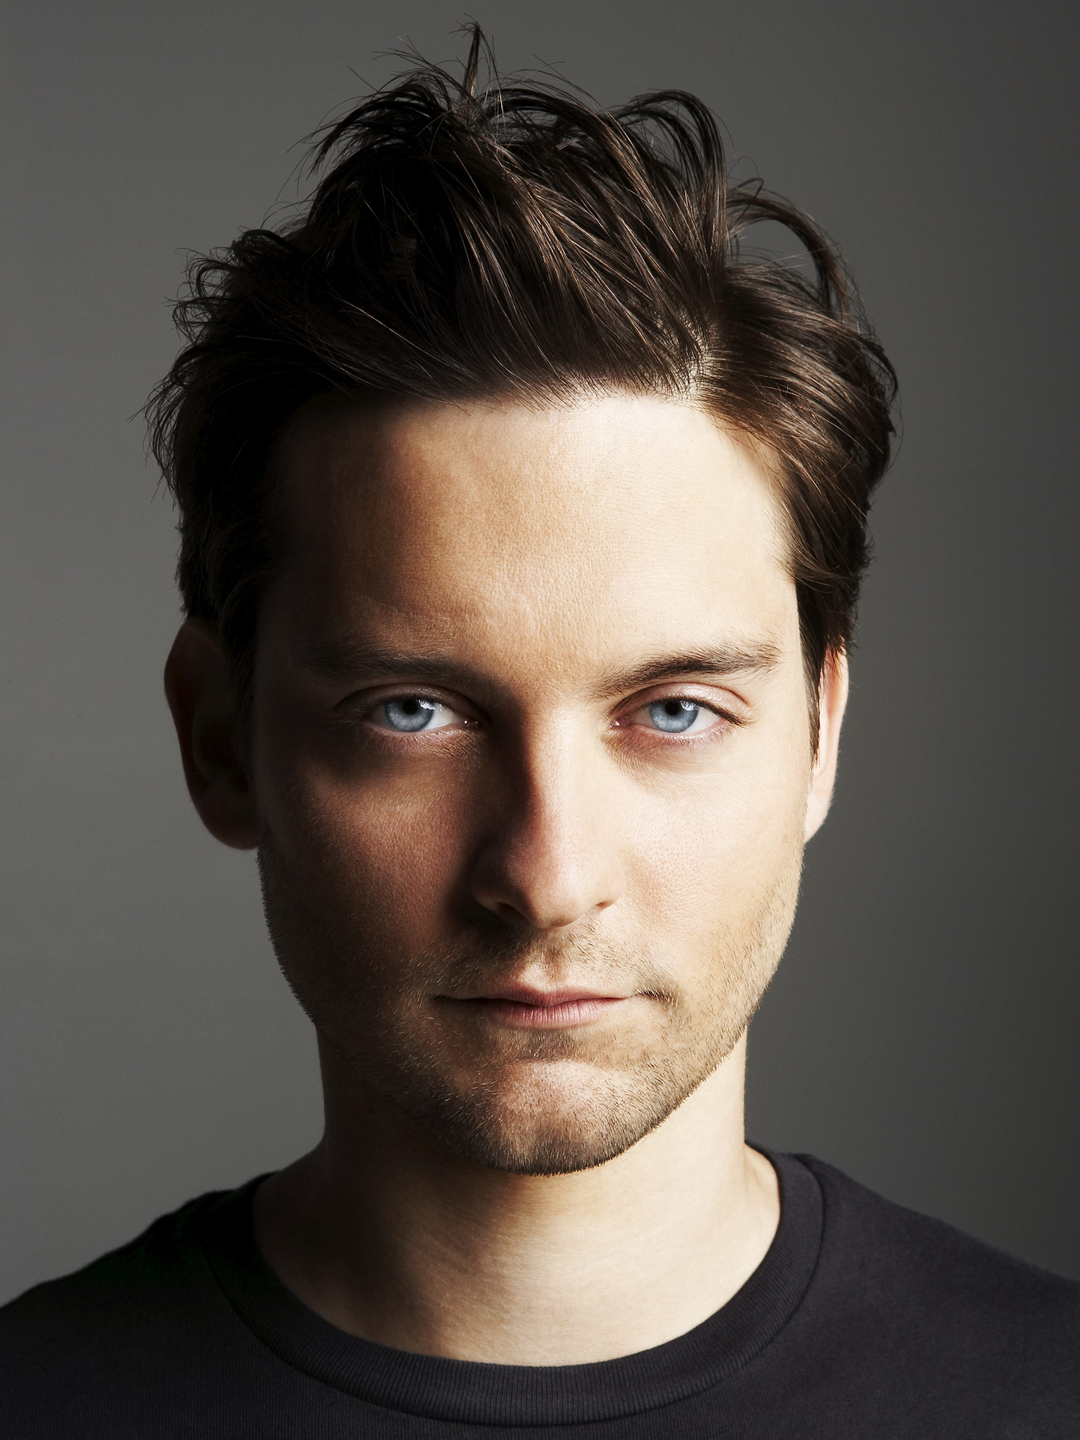 Tobey Maguire personal traits